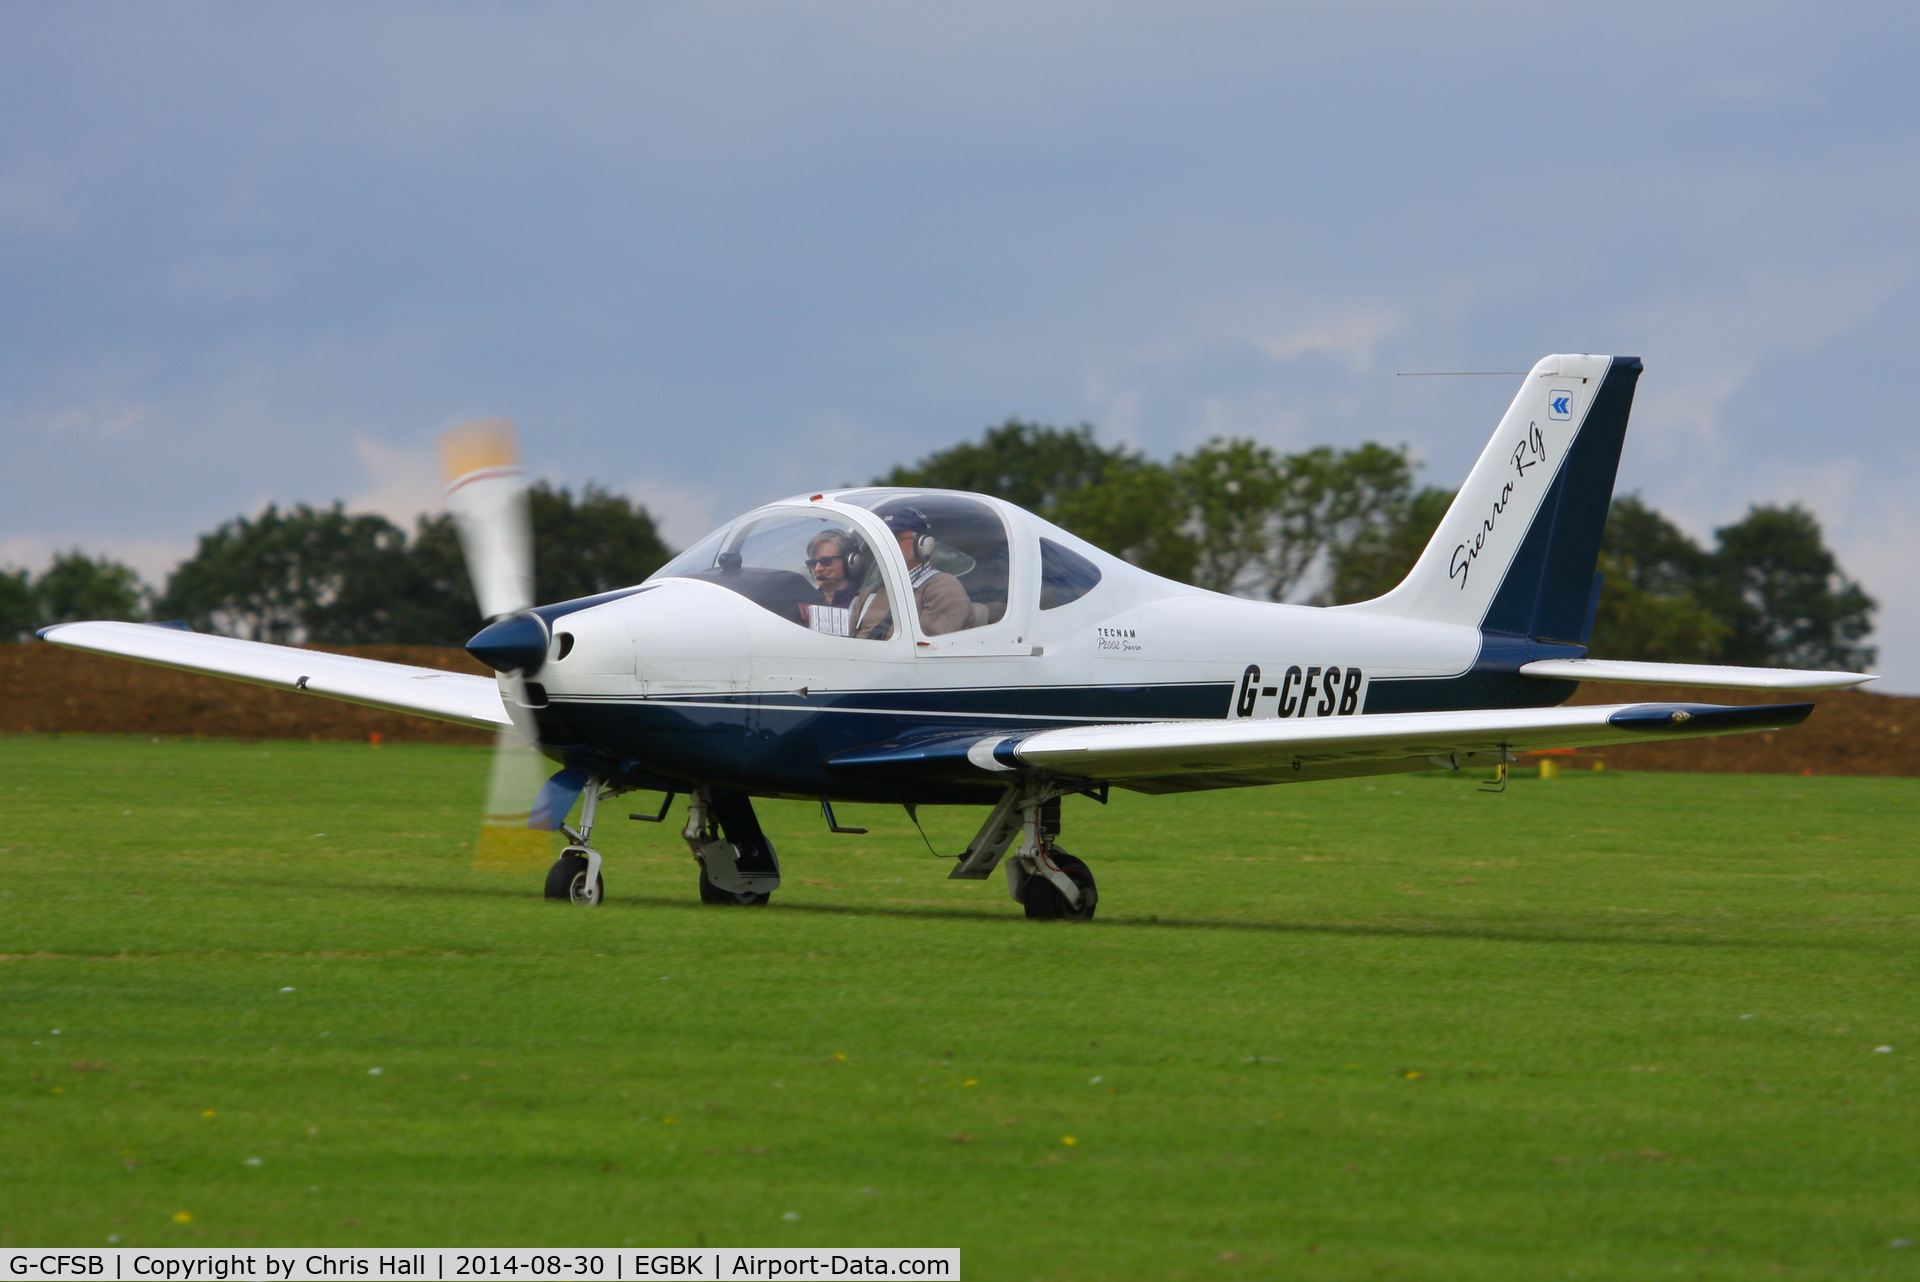 G-CFSB, 2008 Tecnam P-2002RG Sierra C/N LAA 333A-14864, at the LAA Rally 2014, Sywell